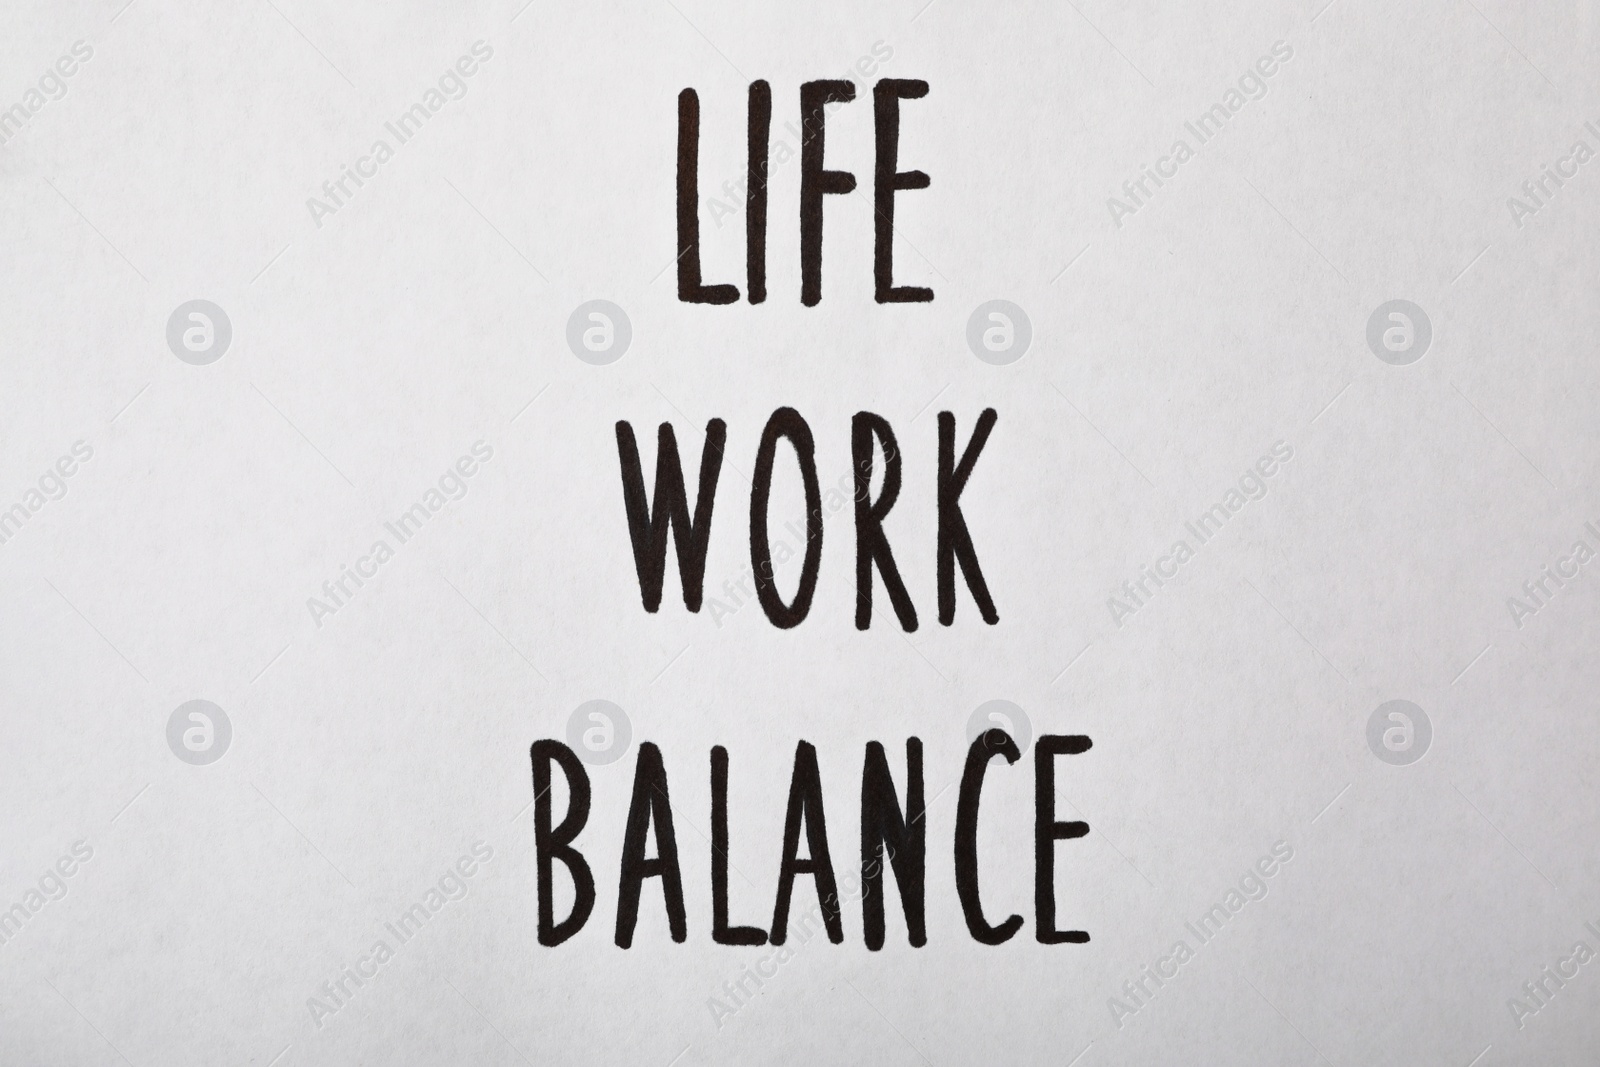 Photo of Life, Work, Balance written on white background, top view